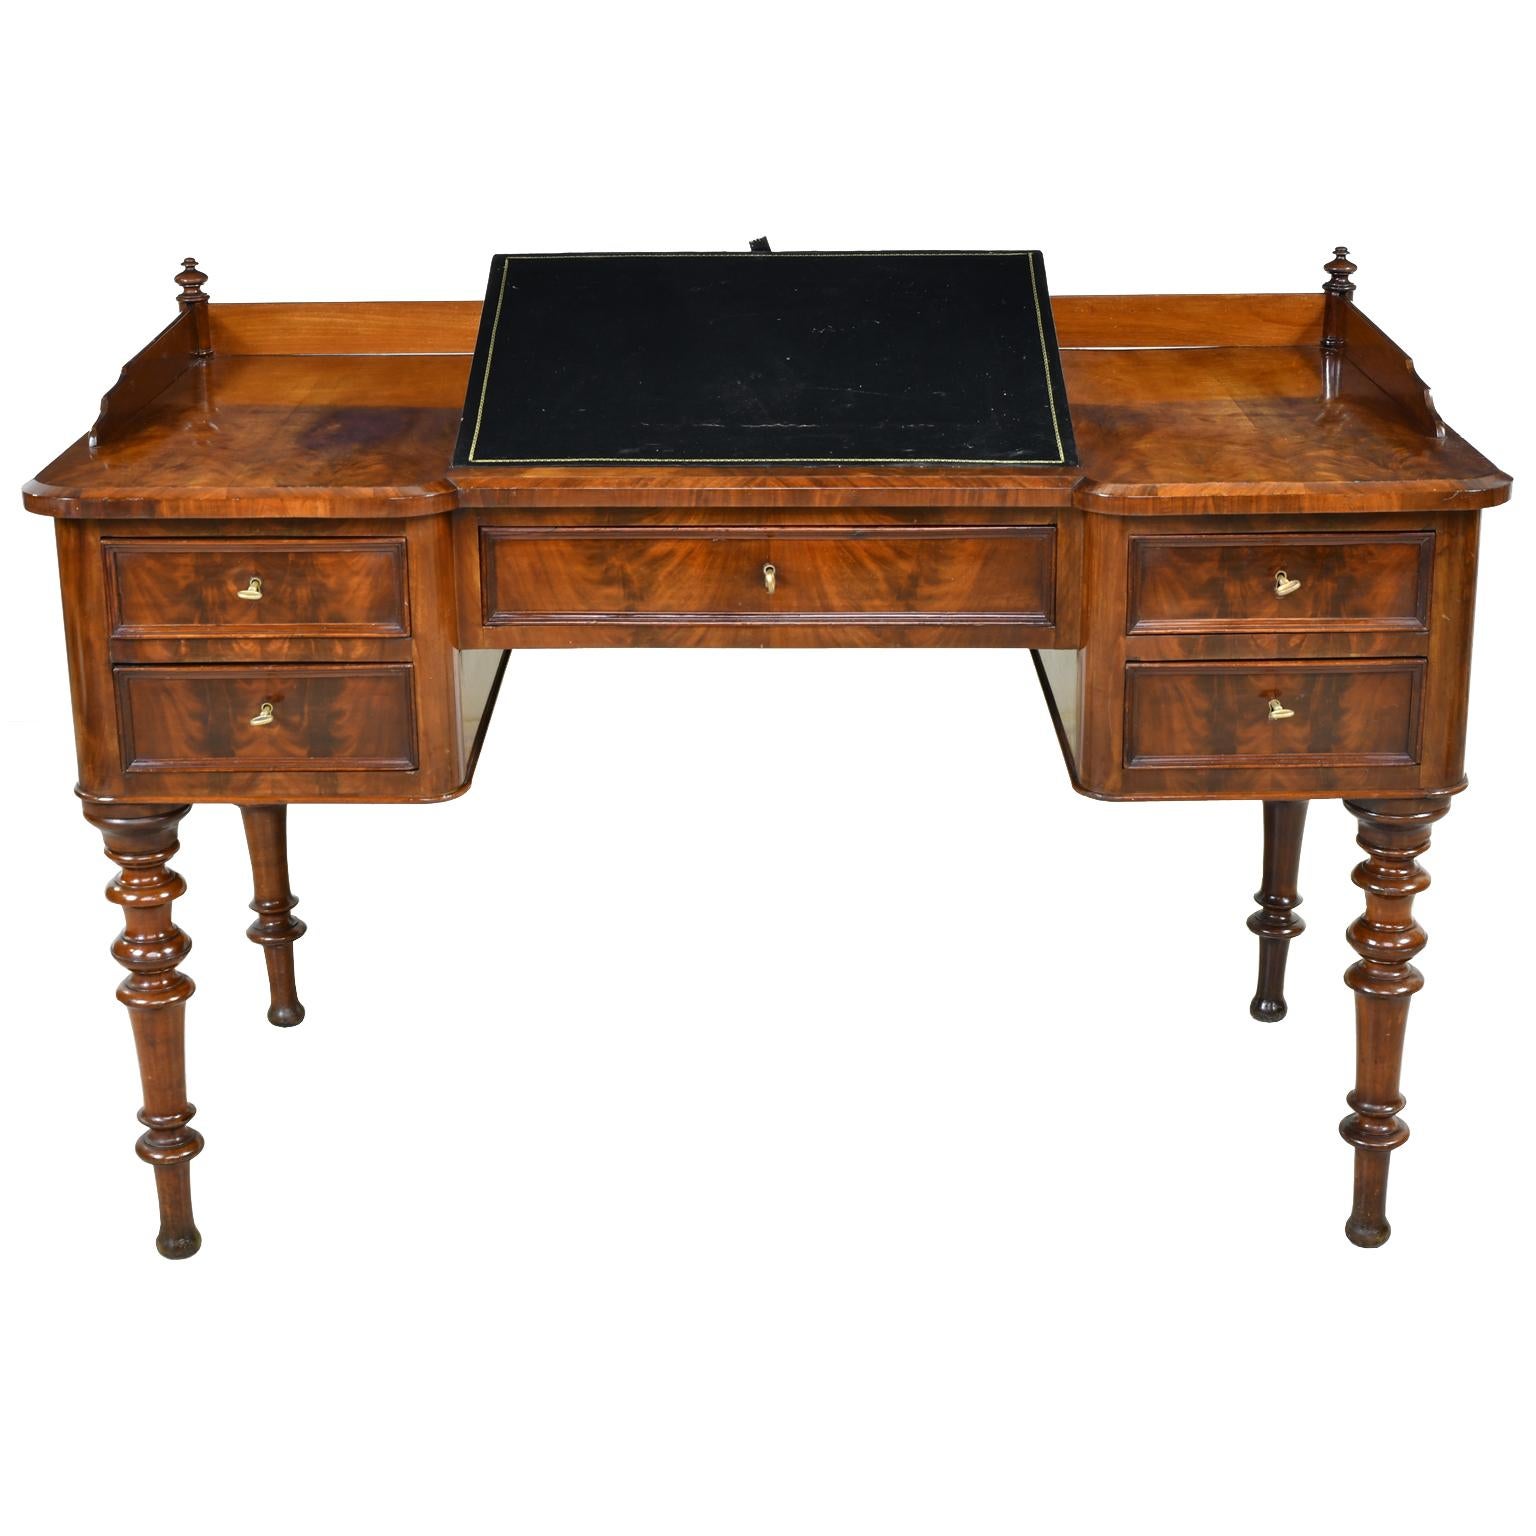 A very lovely Karl Johan writing desk in fine West Indies mahogany with adjustable black leather writing and reading surface above a center drawer that is flanked on each side by two drawers for a total of five storage drawers. Desk can float as it